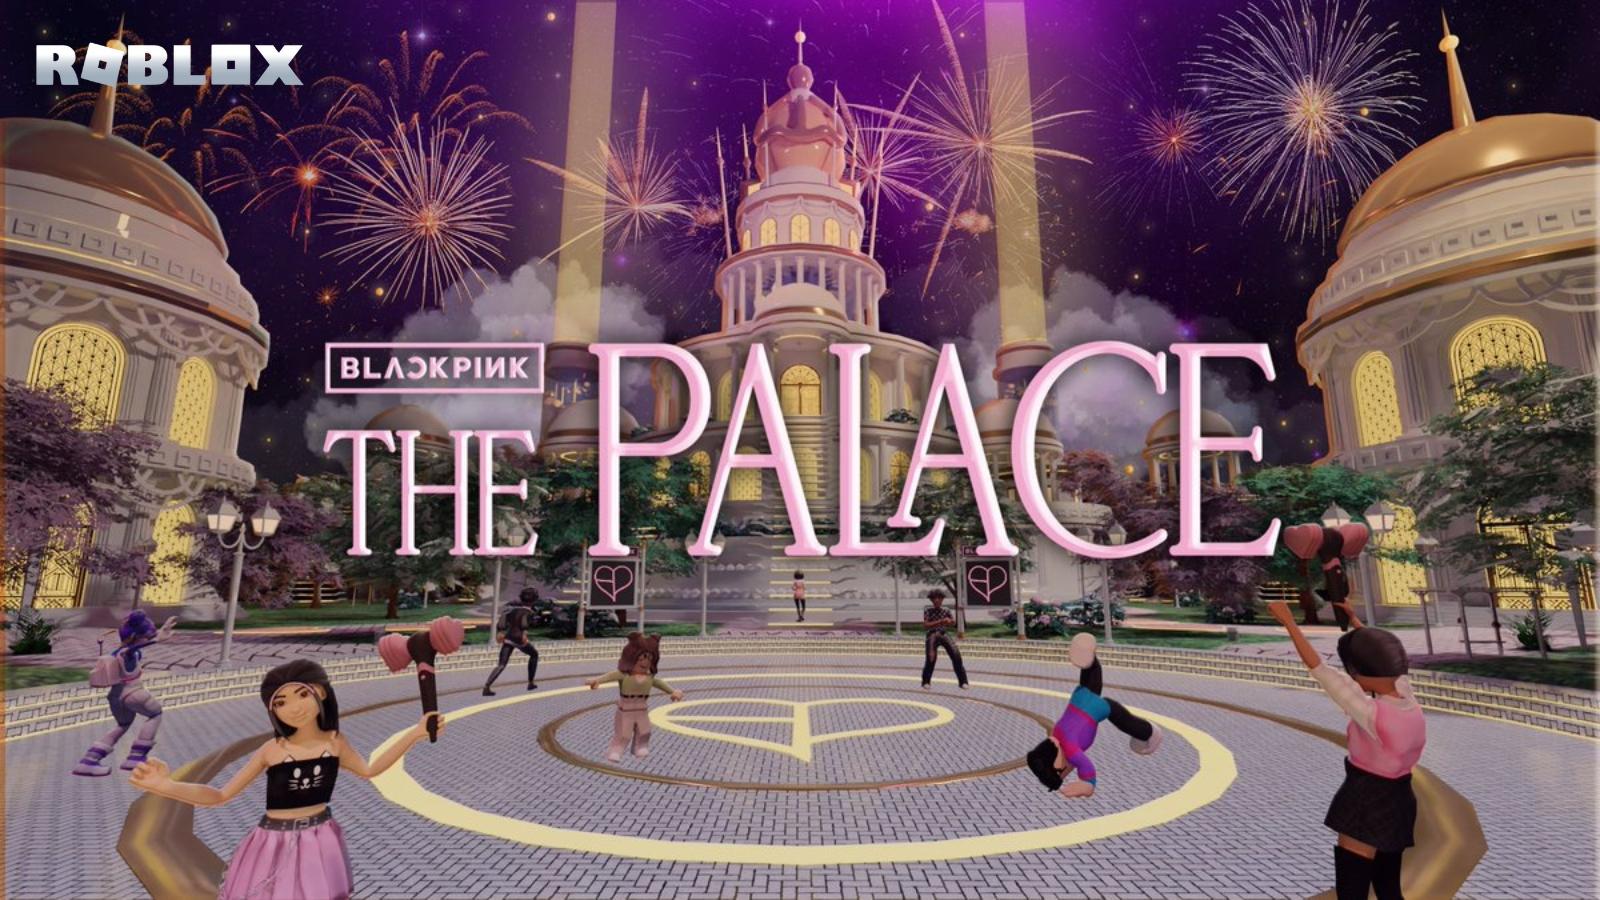 Blackpink The Palace experience in Roblox